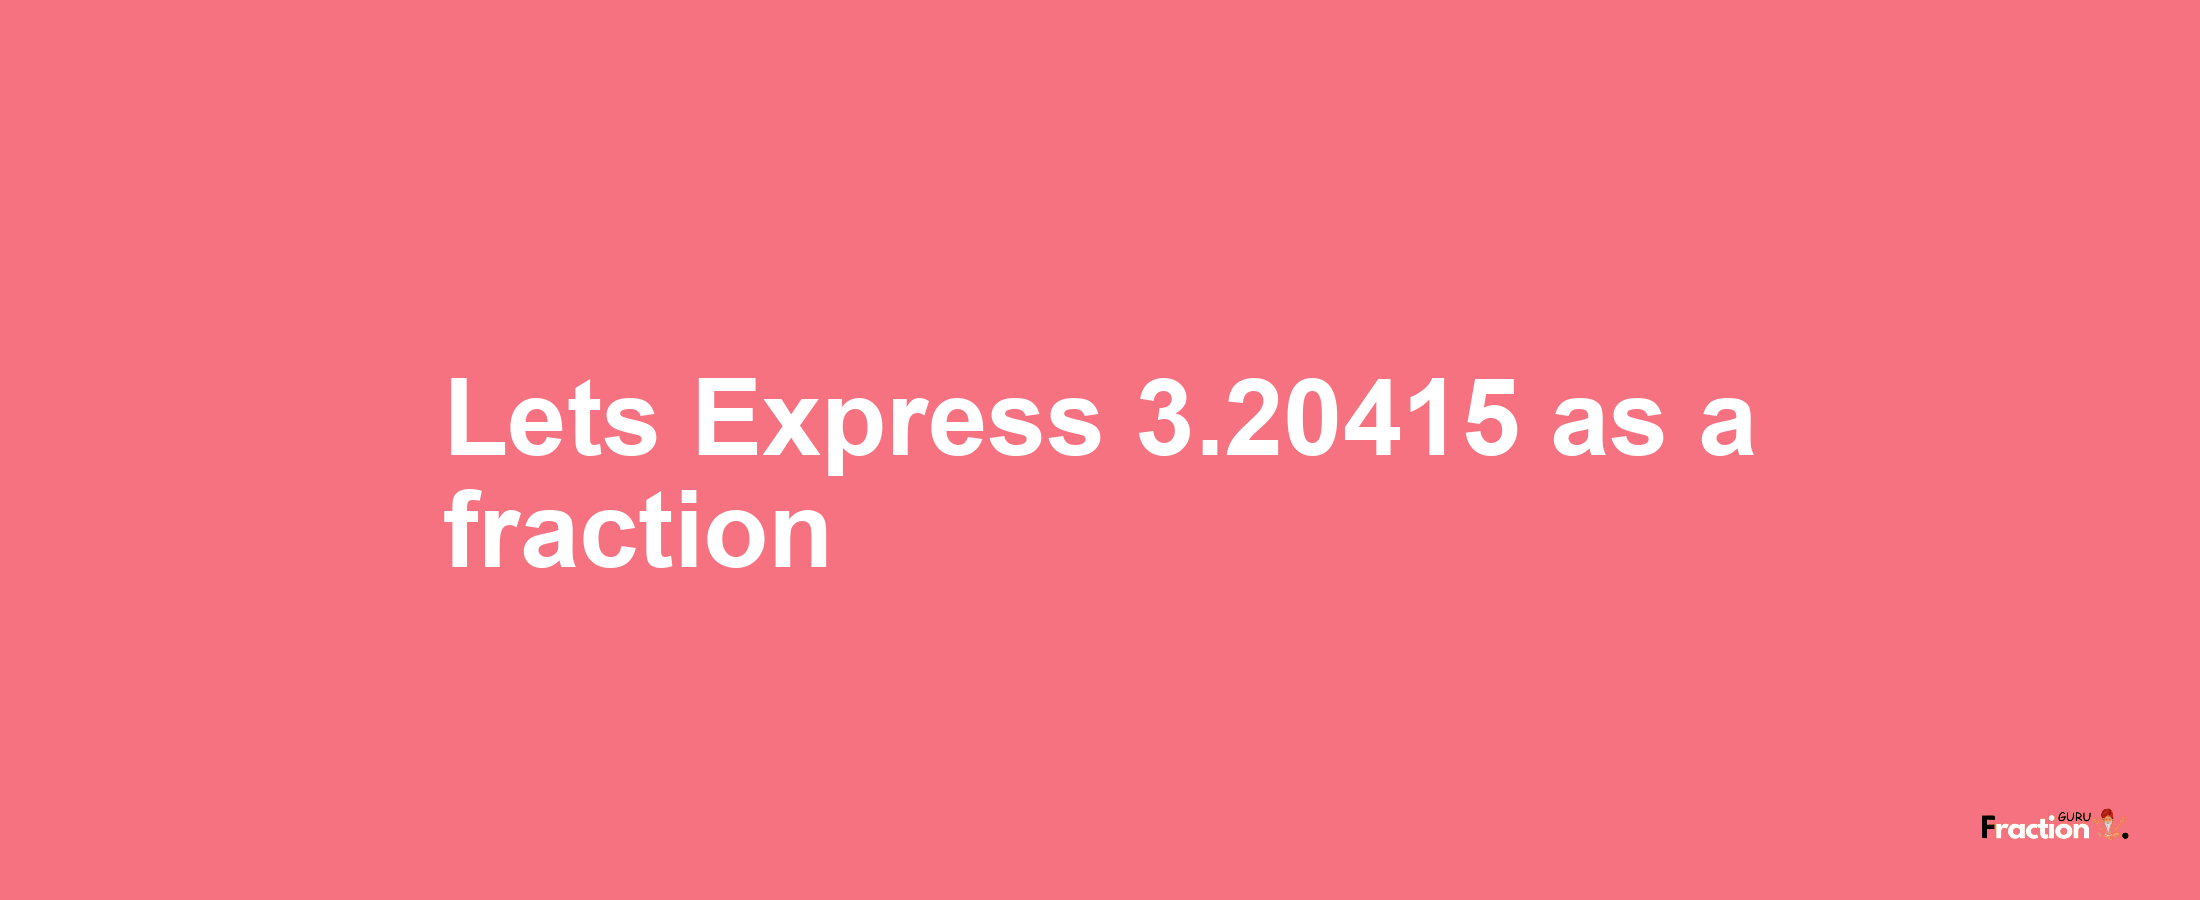 Lets Express 3.20415 as afraction